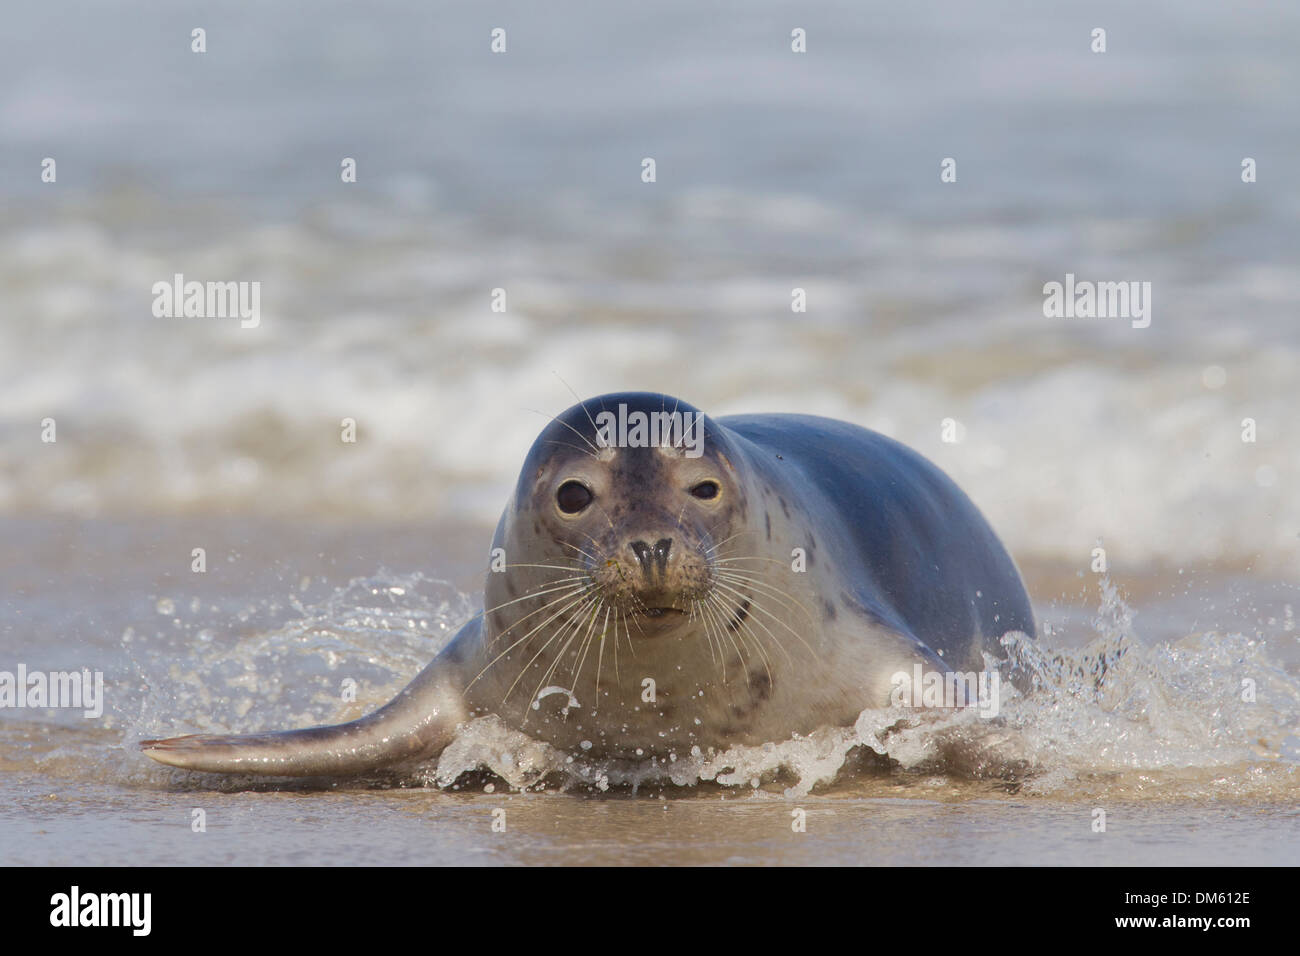 Common Seal, Harbour Seal (Phoca vitulina vitulina). Adult hauling out from the North Sea, Germany Stock Photo